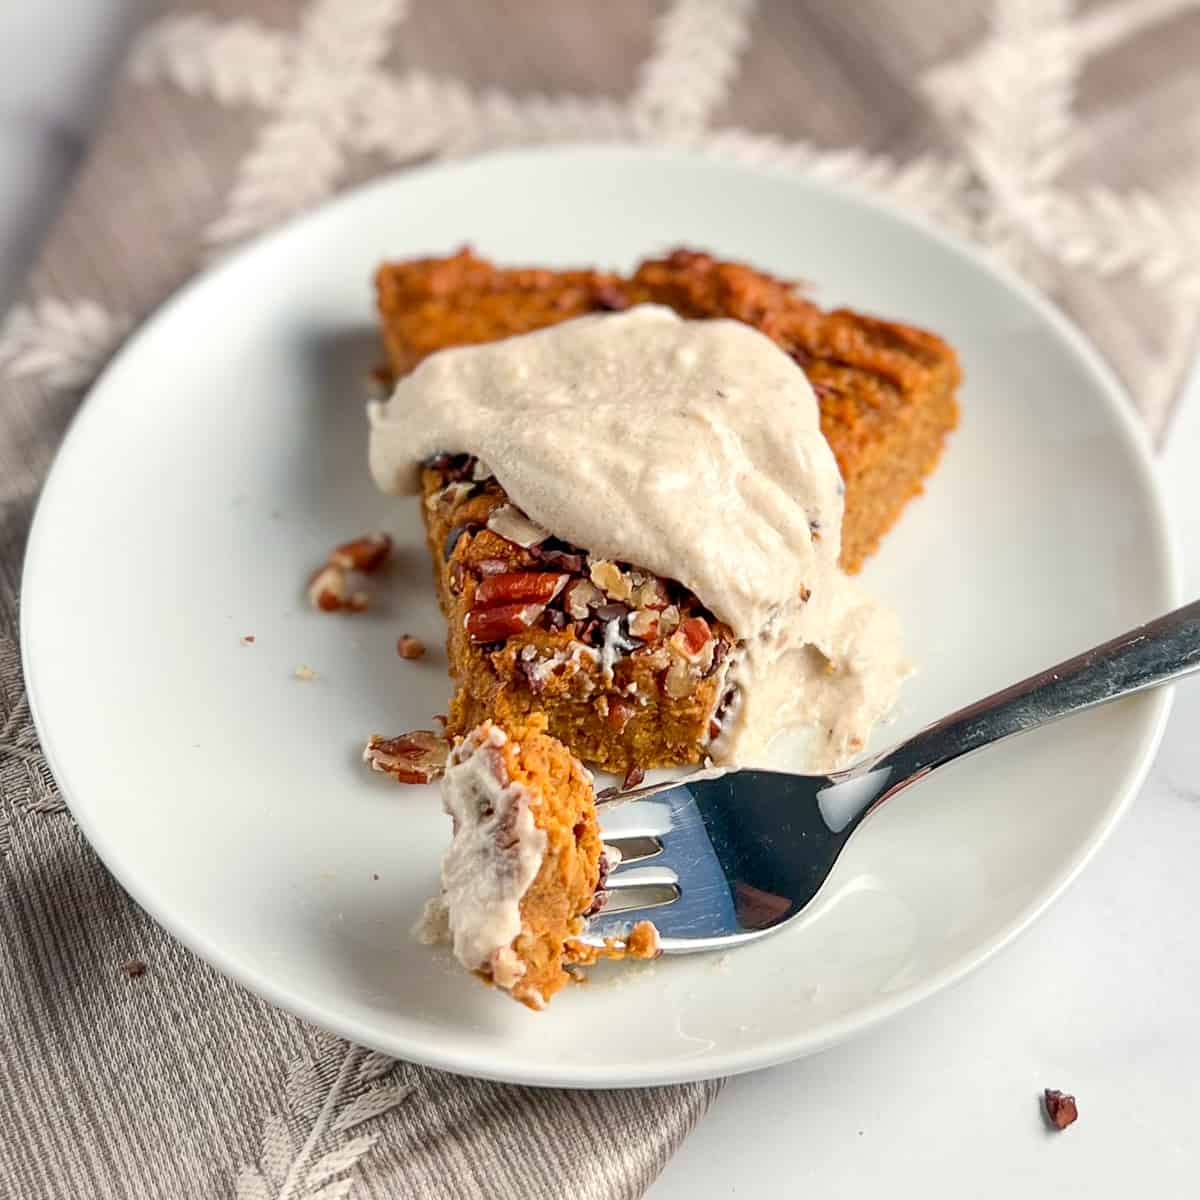 top side view of a slice of crustless sweet potato pie with a dollop of sweet cashew cream and fork with a bite size piece